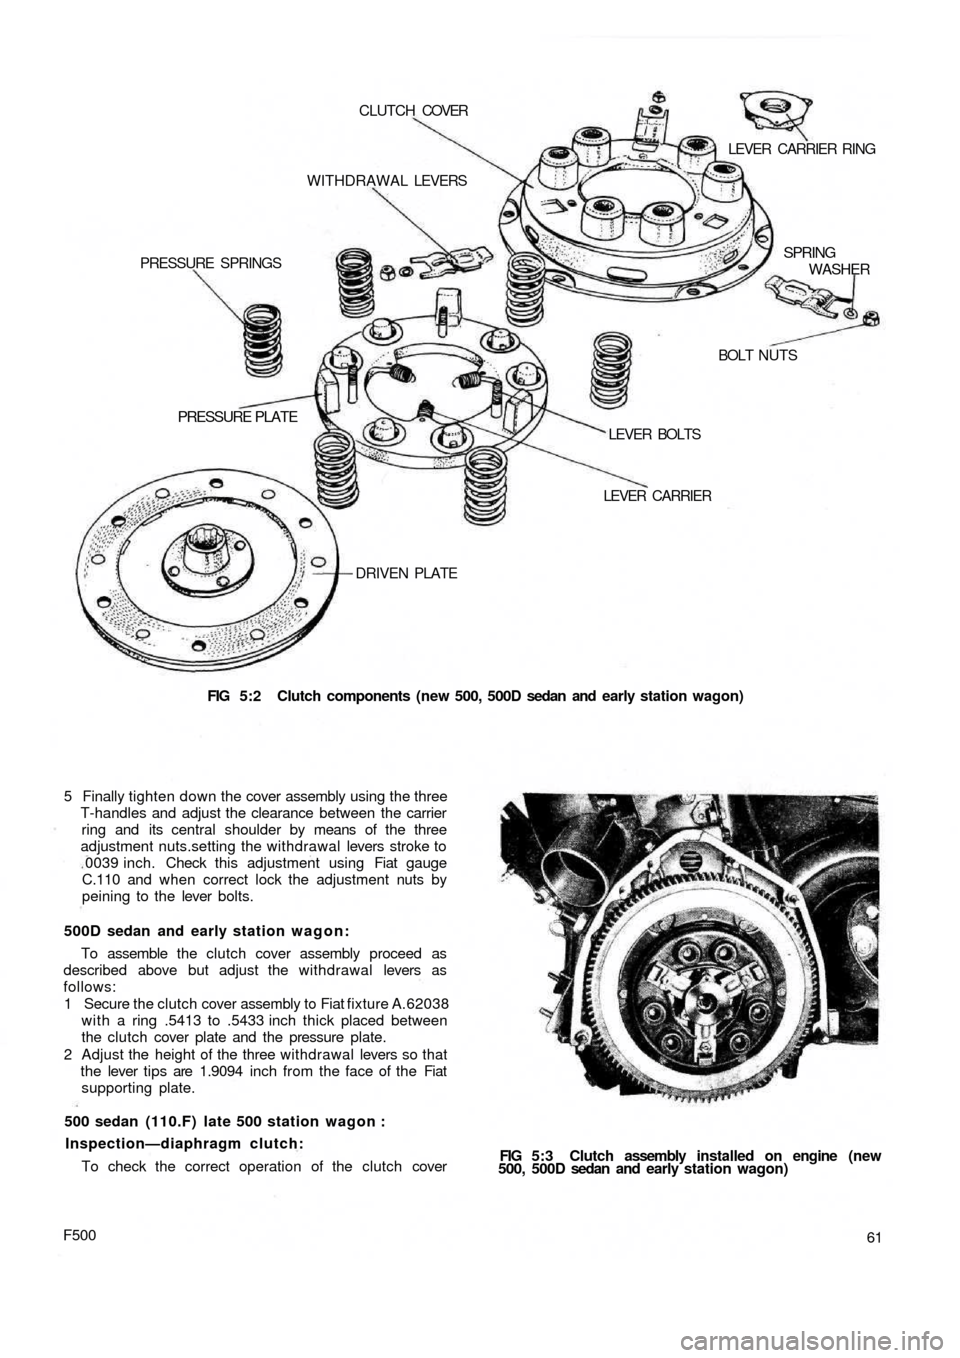 FIAT 500 1971 1.G Repair Manual FIG 5:2  Clutch components (new 500, 500D sedan  and  early station wagon) DRIVEN PLATE
PRESSURE  PLATE
LEVER  CARRIER LEVER  BOLTSBOLT NUTS PRESSURE  SPRINGSWITHDRAWAL LEVERS CLUTCH COVER
LEVER  CARR